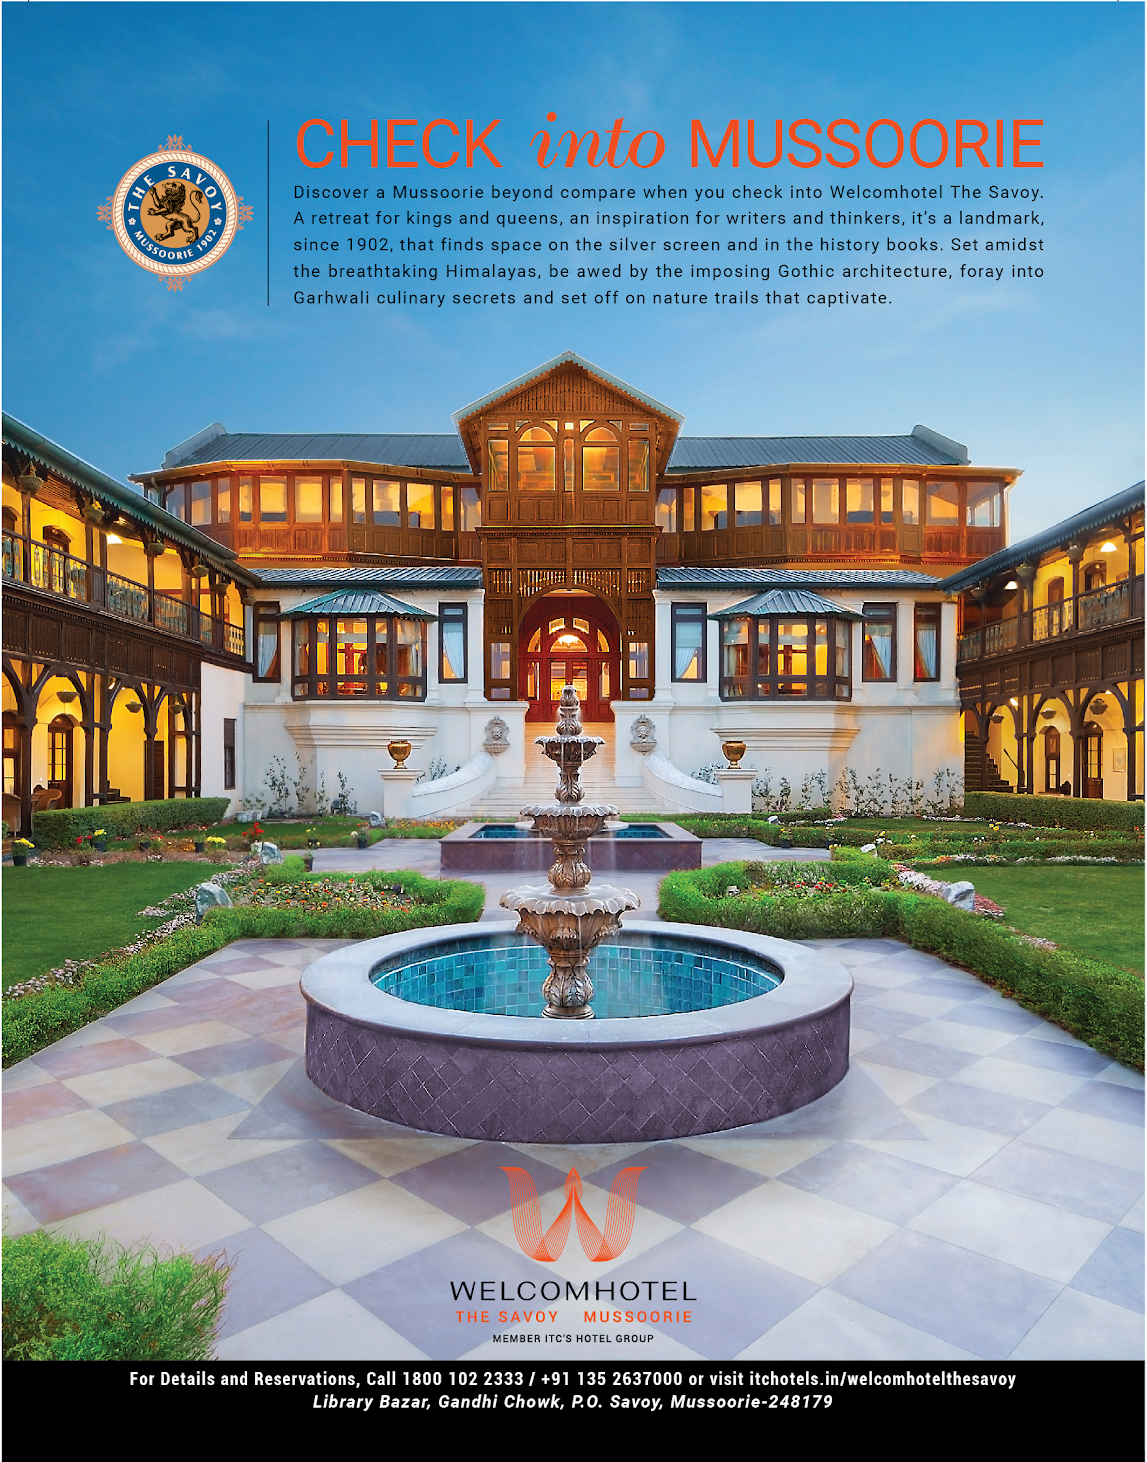 360° Media for SAVOY Hotel, Mussoorie